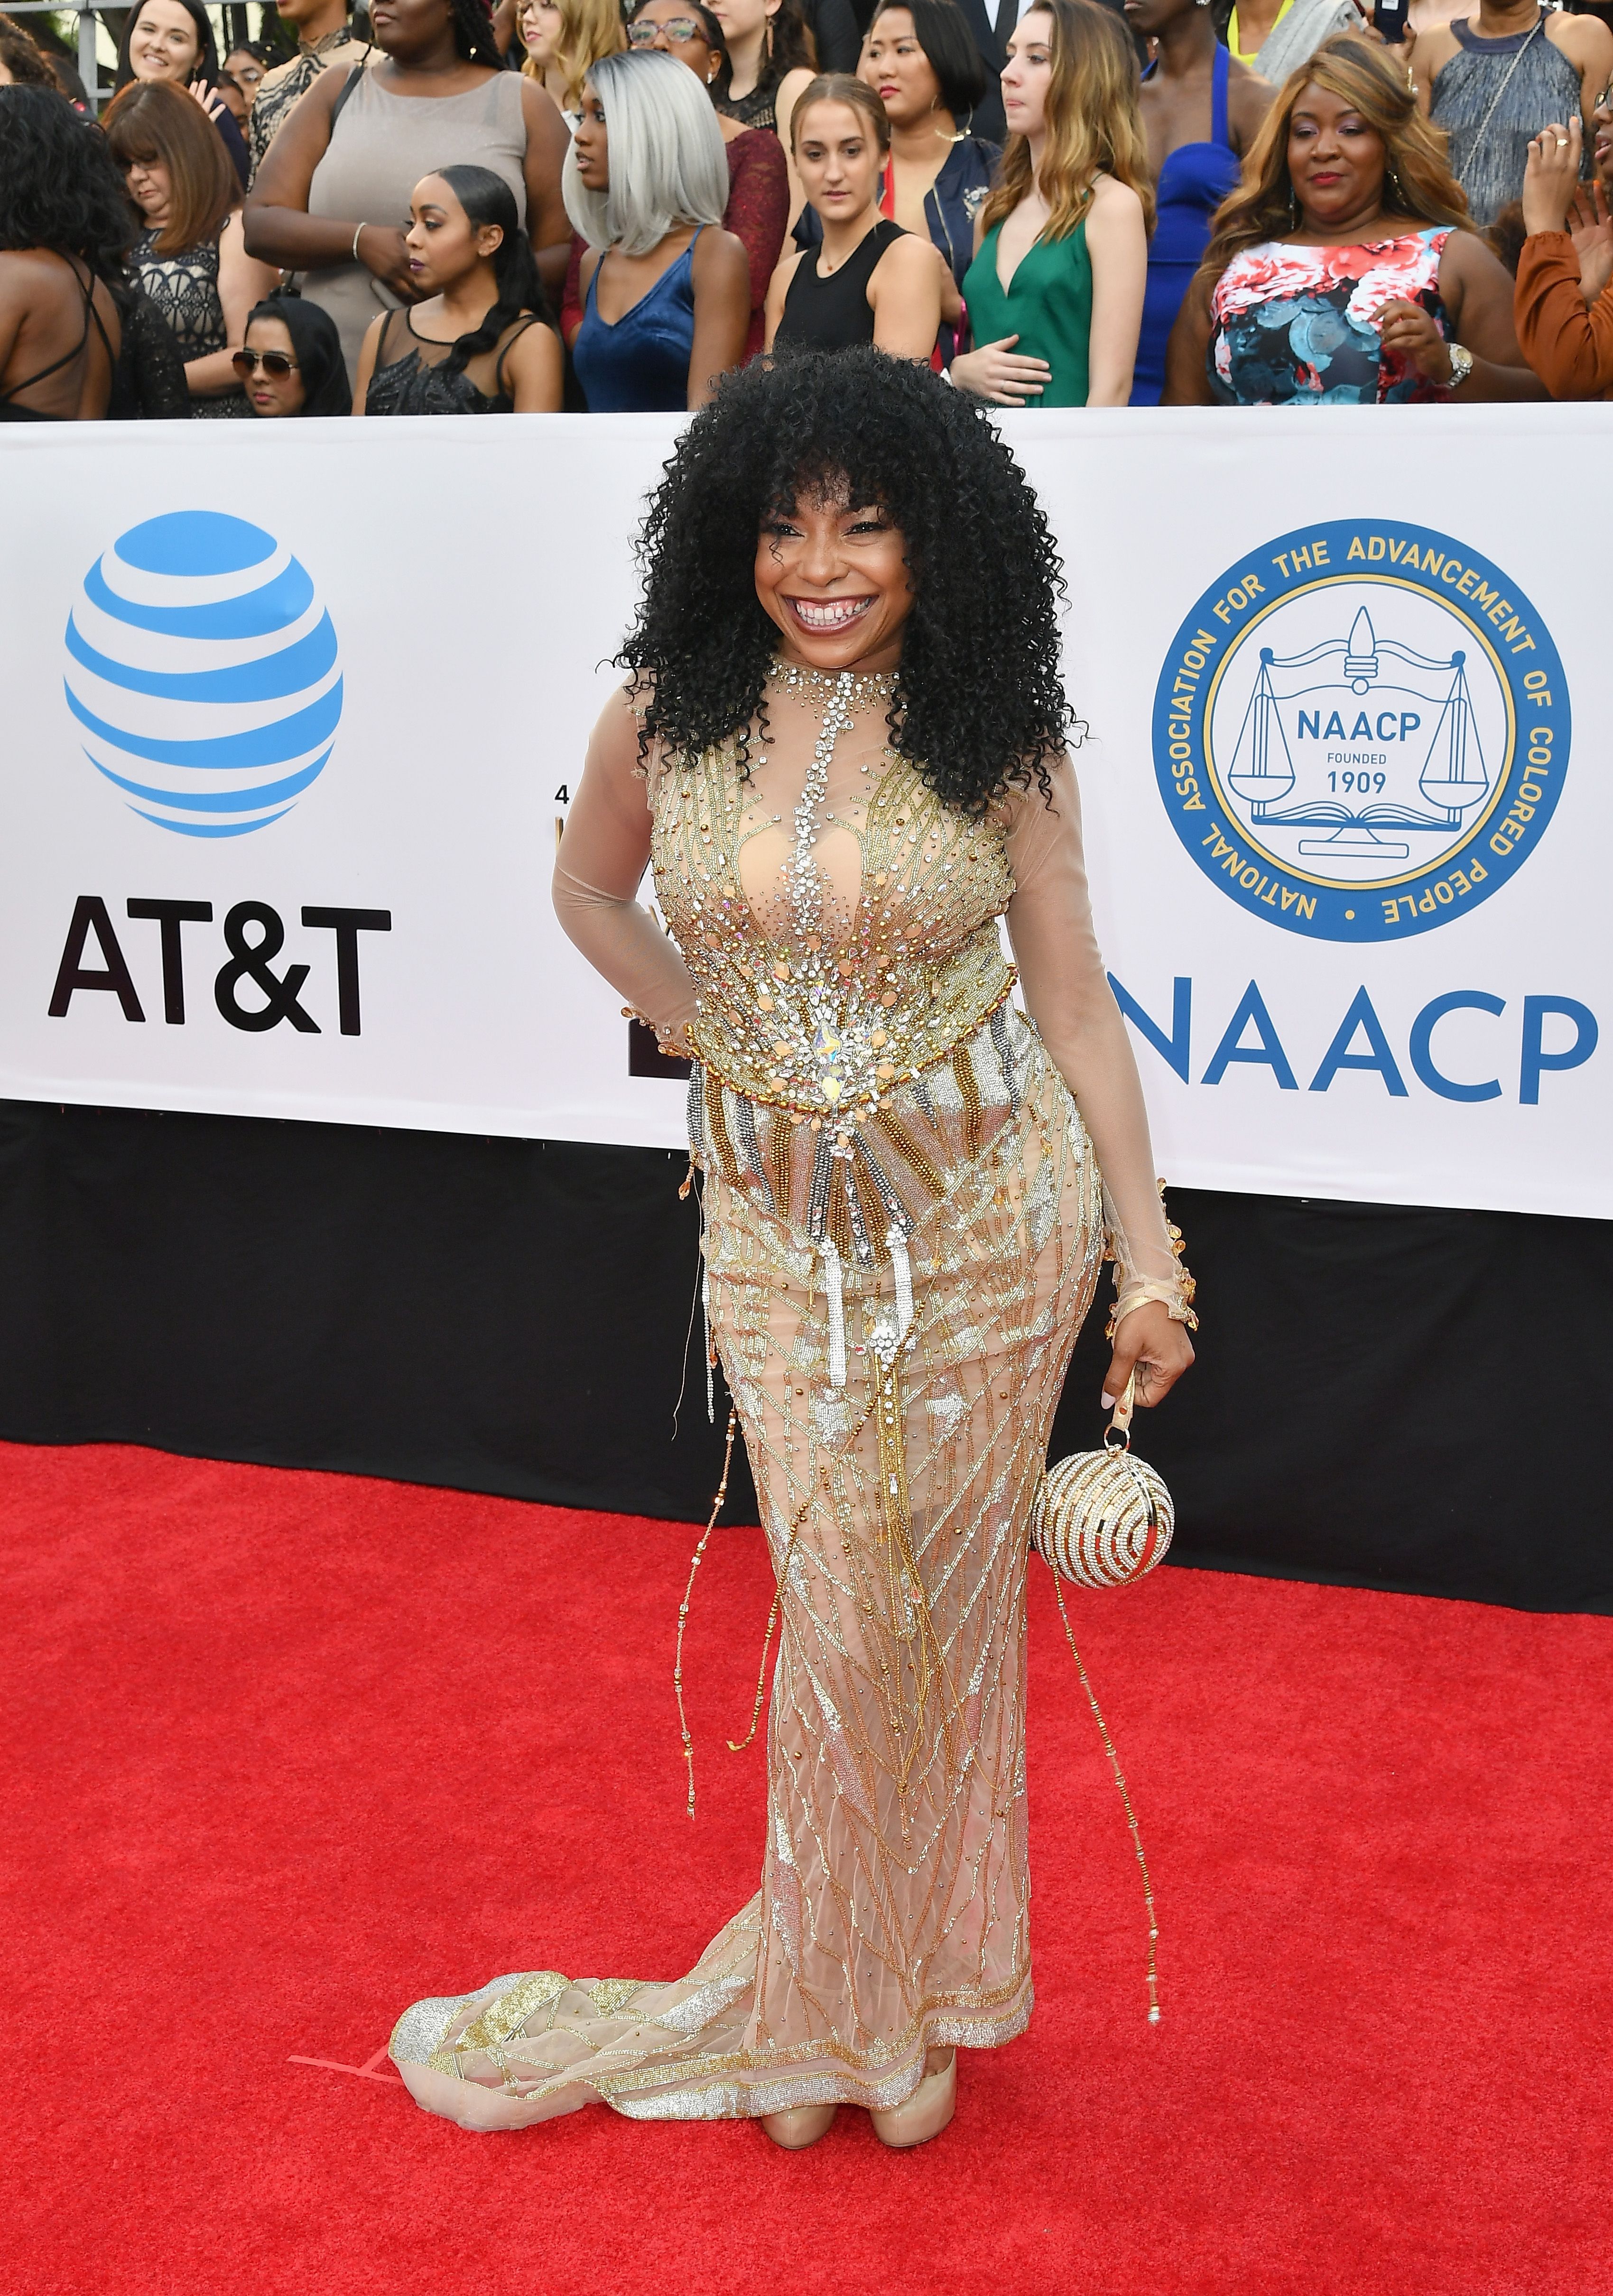 All the Looks From the 49th NAACP Image Awards Red Carpet